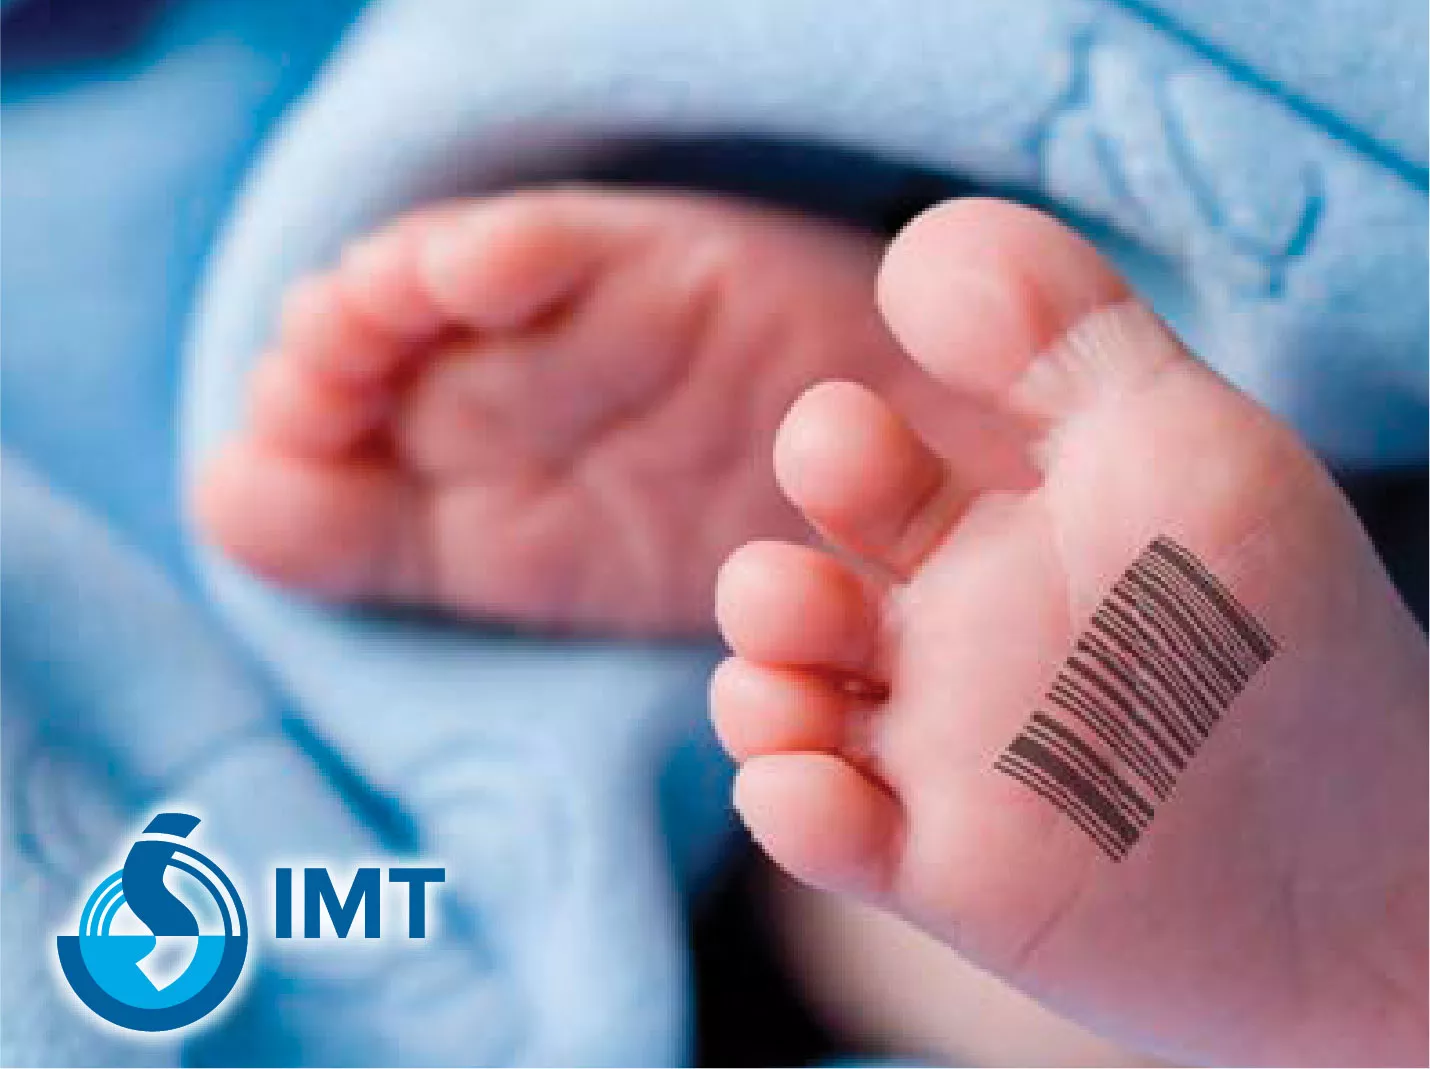 IMT Matcher IVF Electronic Witnessing System